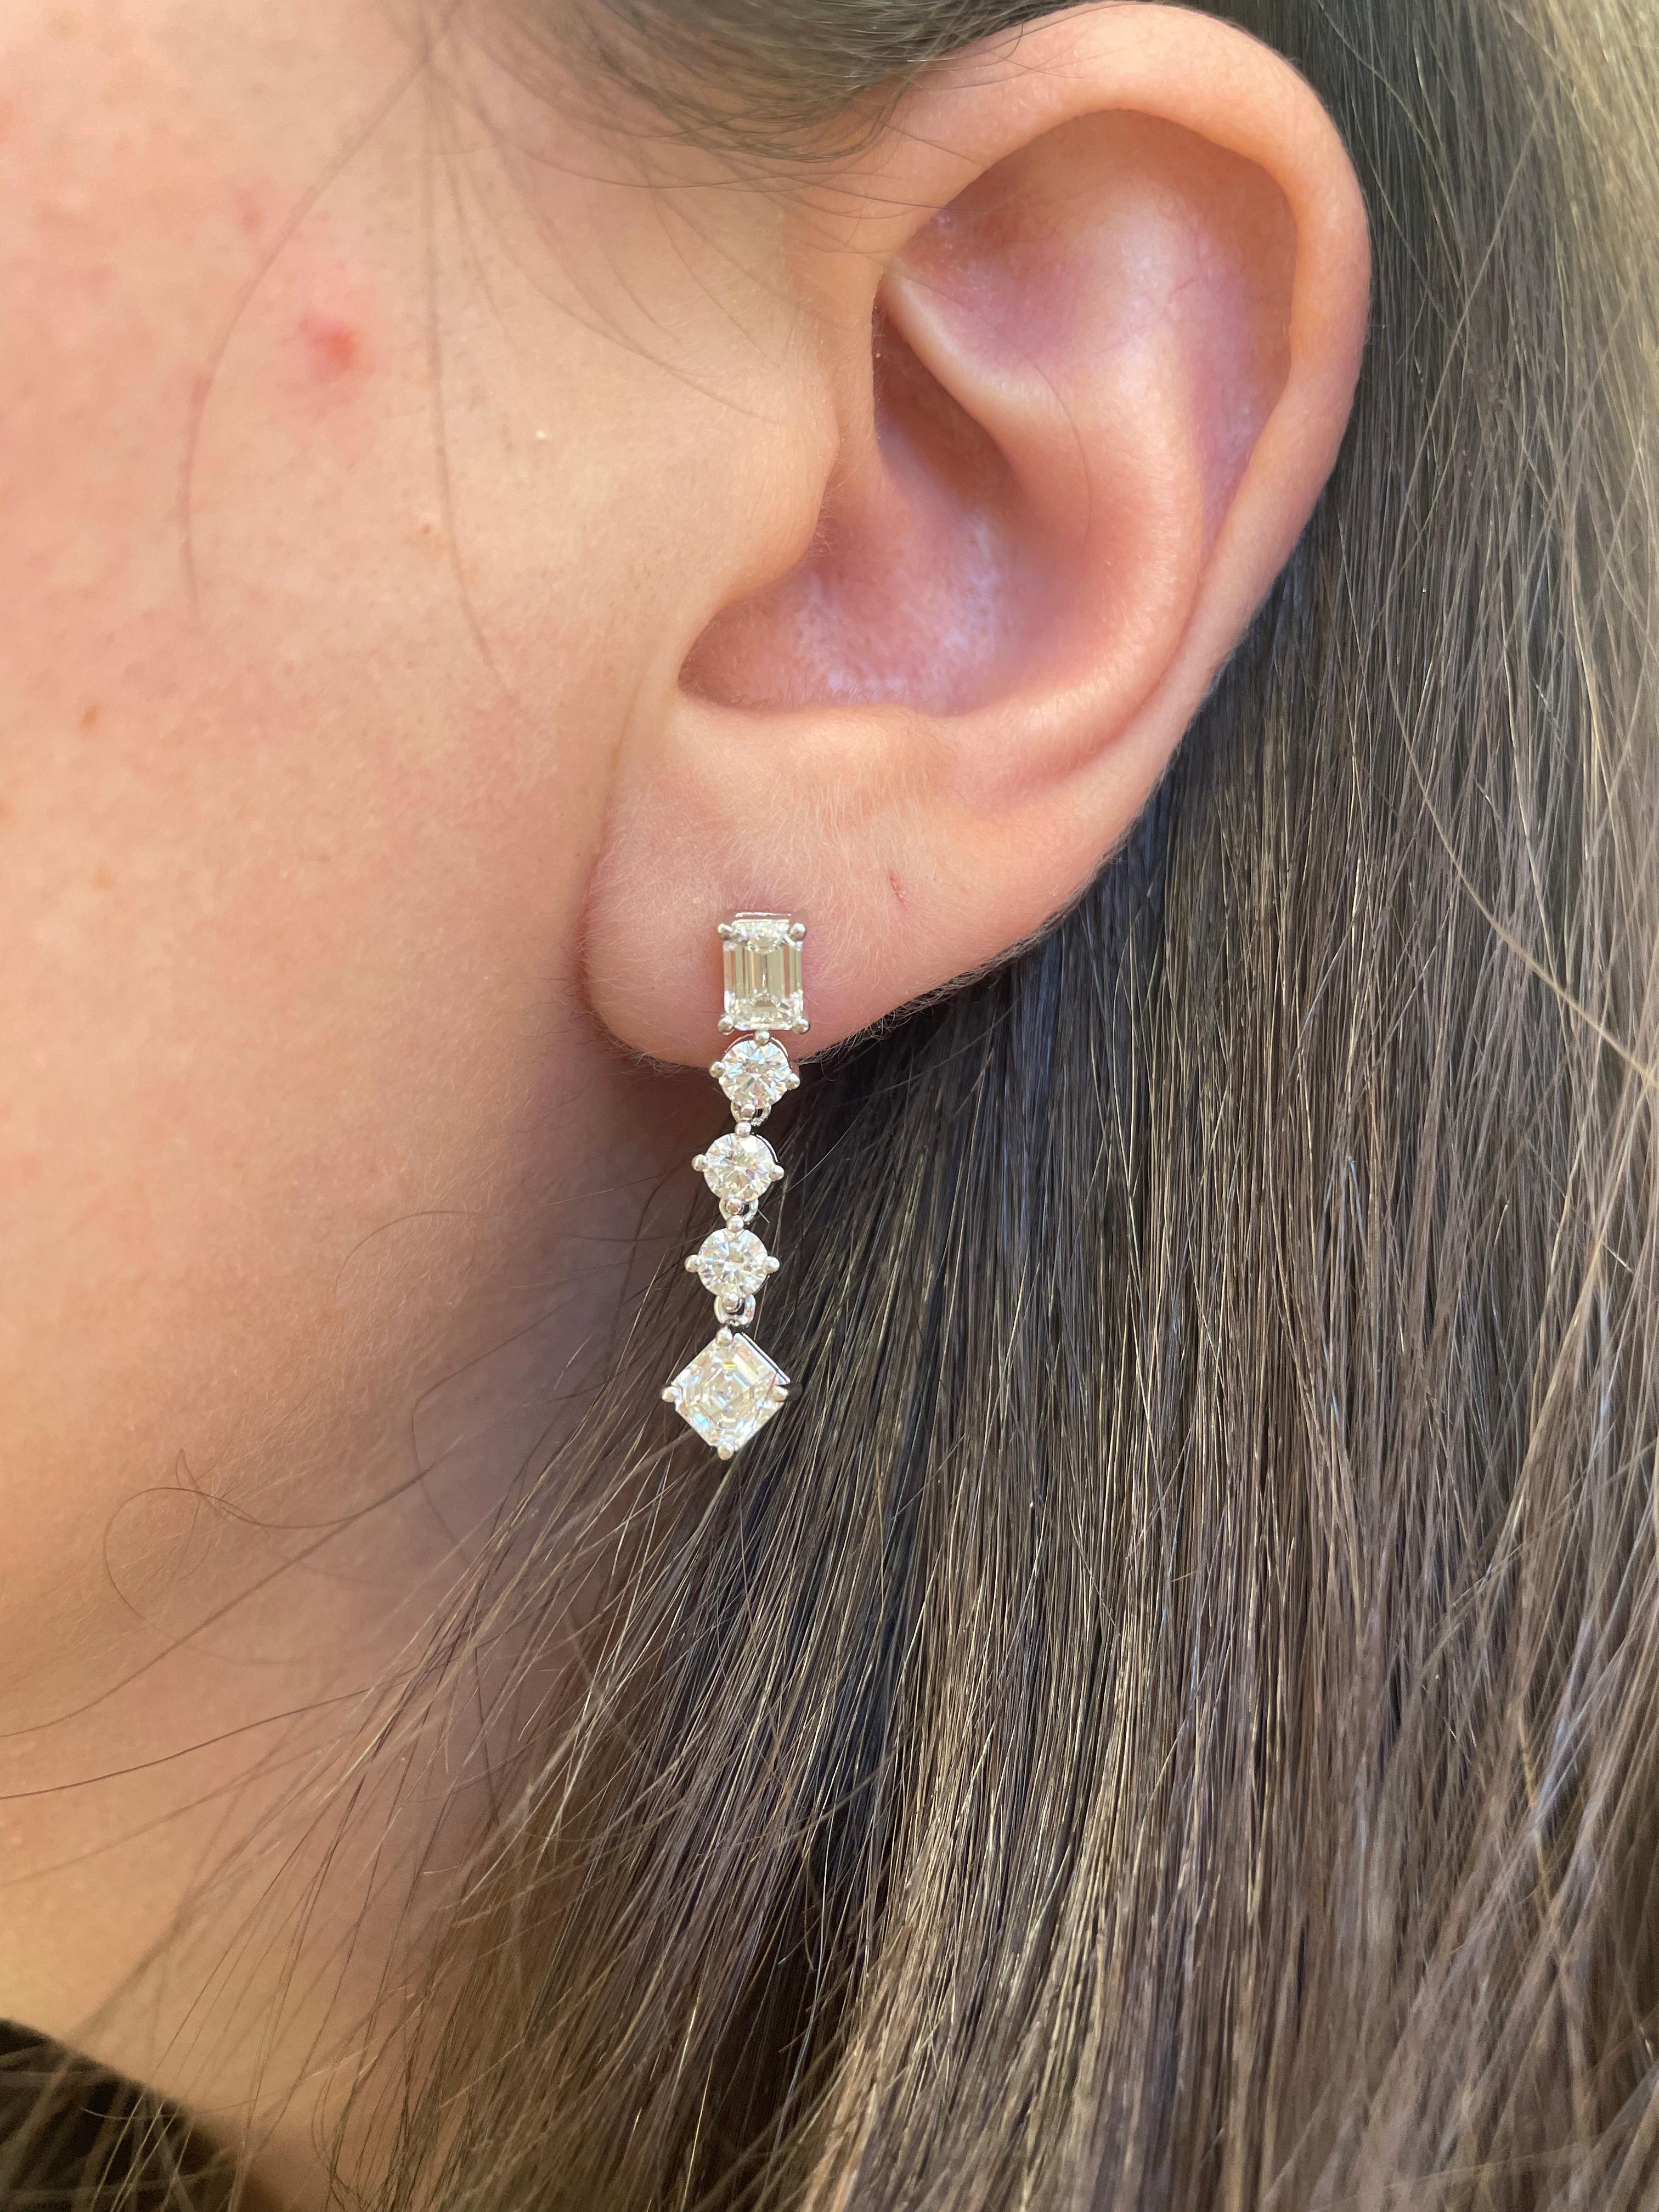 Stunning dangling diamond earring, GIA certified. By Alexander Beverly Hills.
2 asscher cut diamonds and 2 emerald cut diamonds, GIA certified, D-E color, VVS1-SI1 clarity. Complimented by 6 round brilliant diamonds, 0.87ct. Approximately E/F color